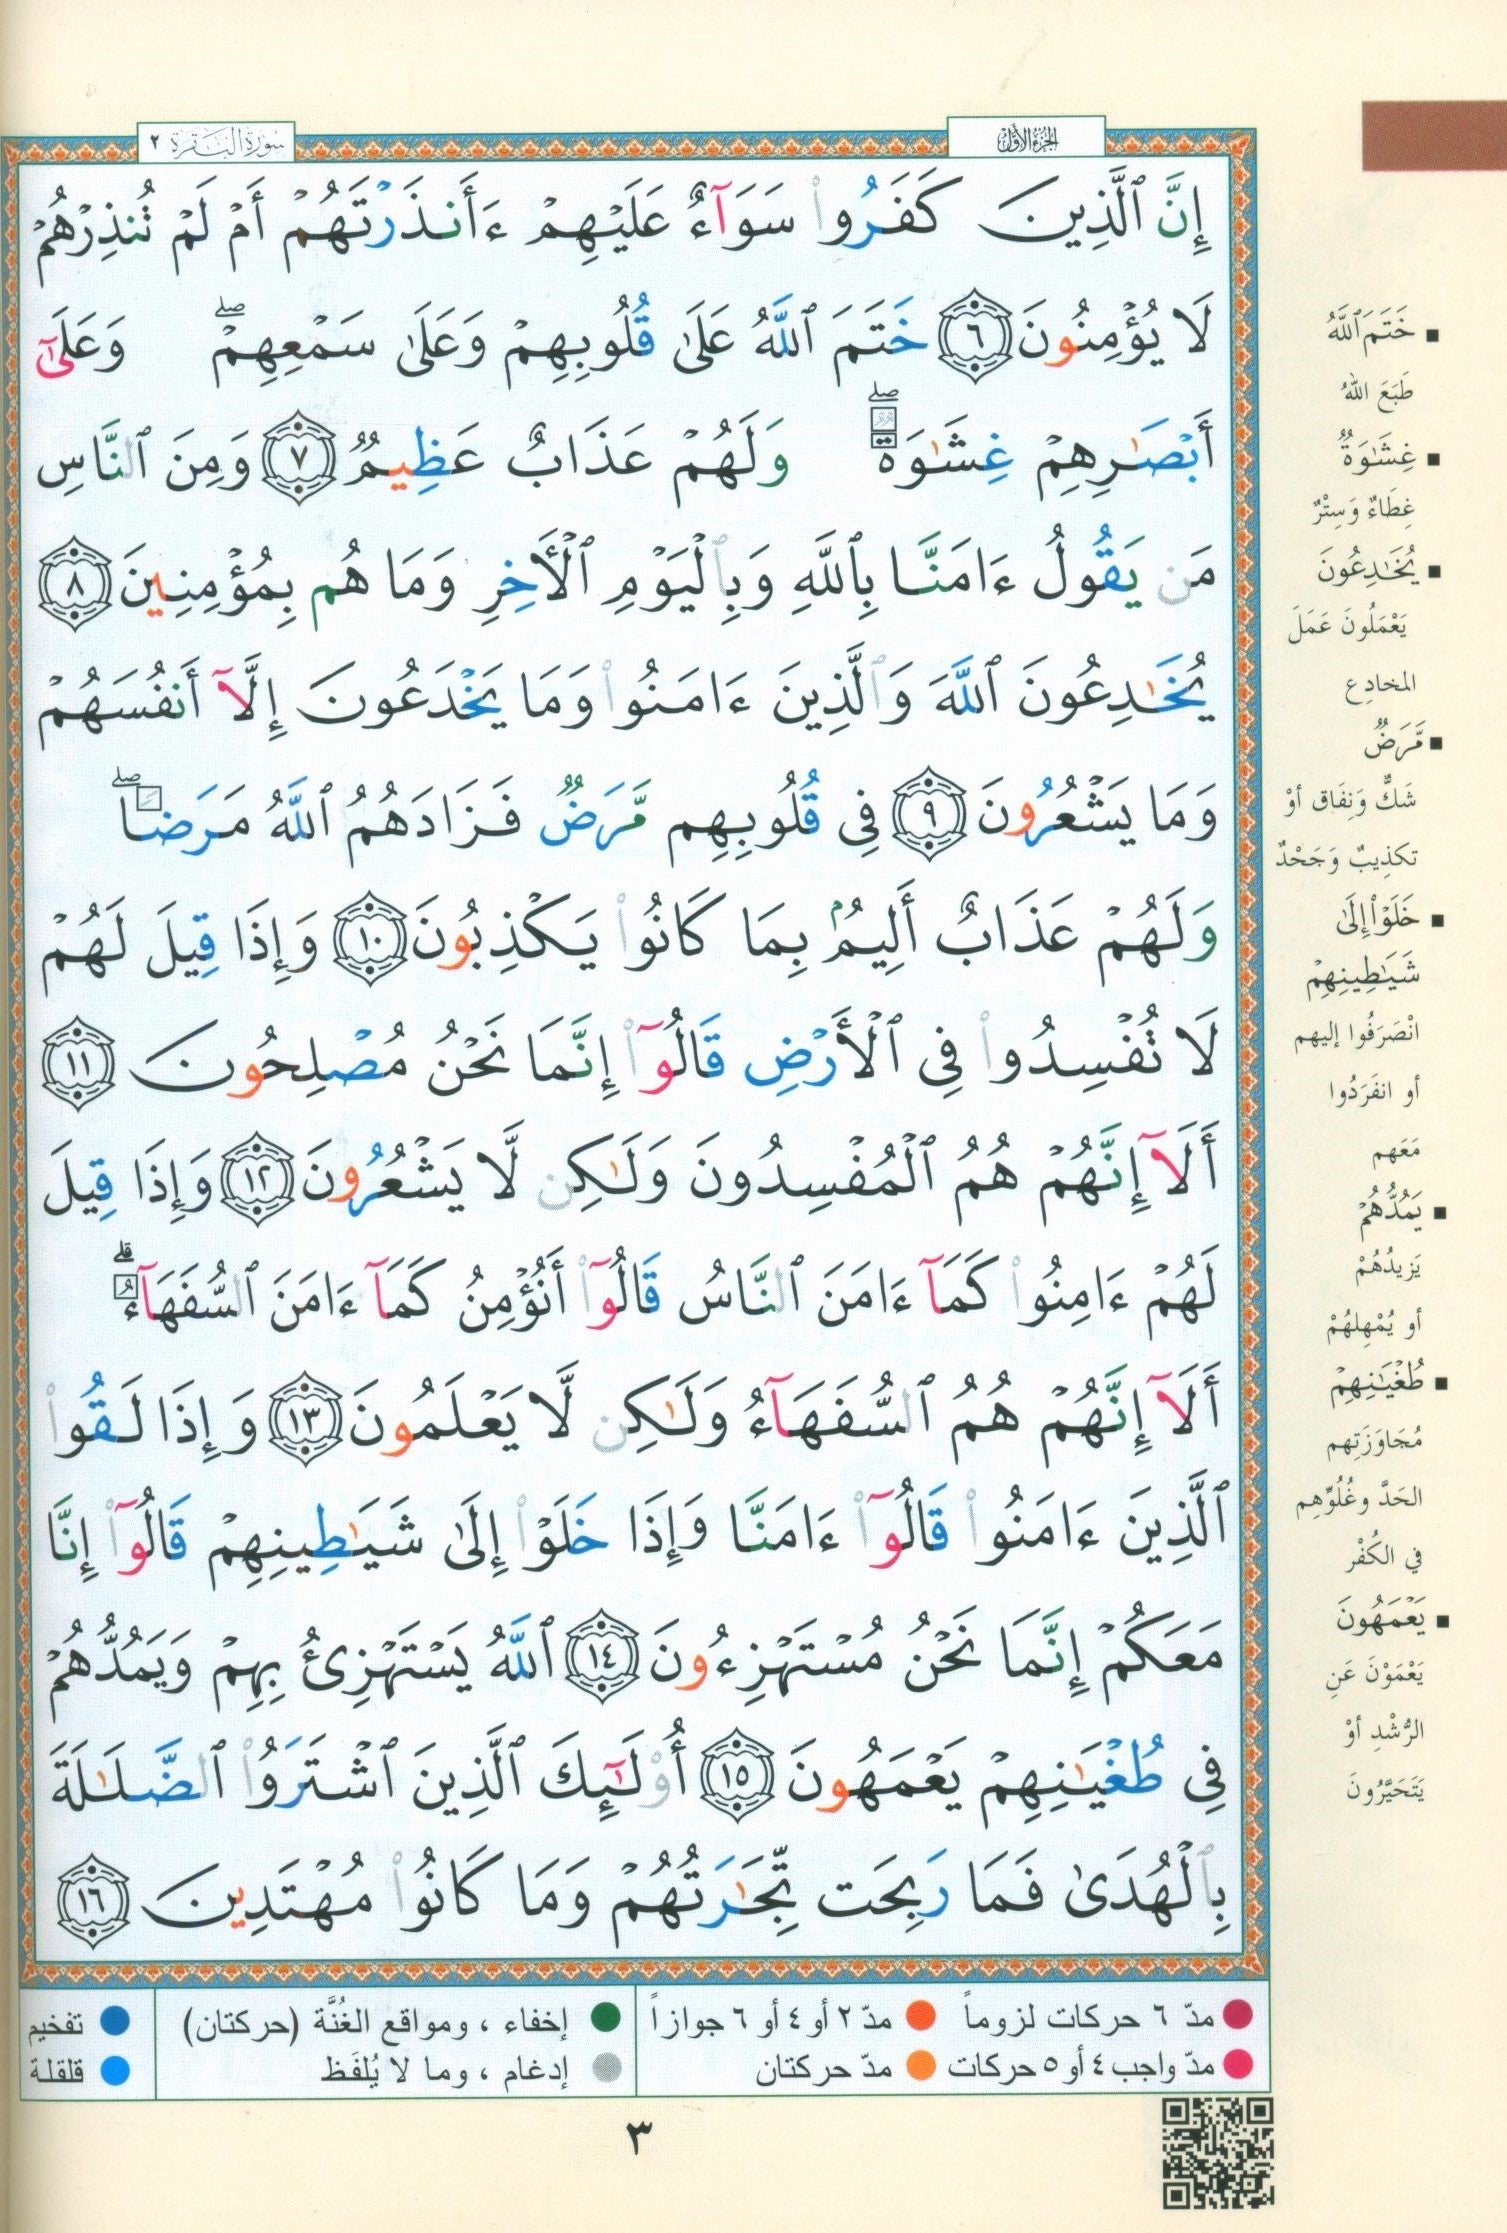 Color Coded Tajweed Quran (Silver & Gold Cover)